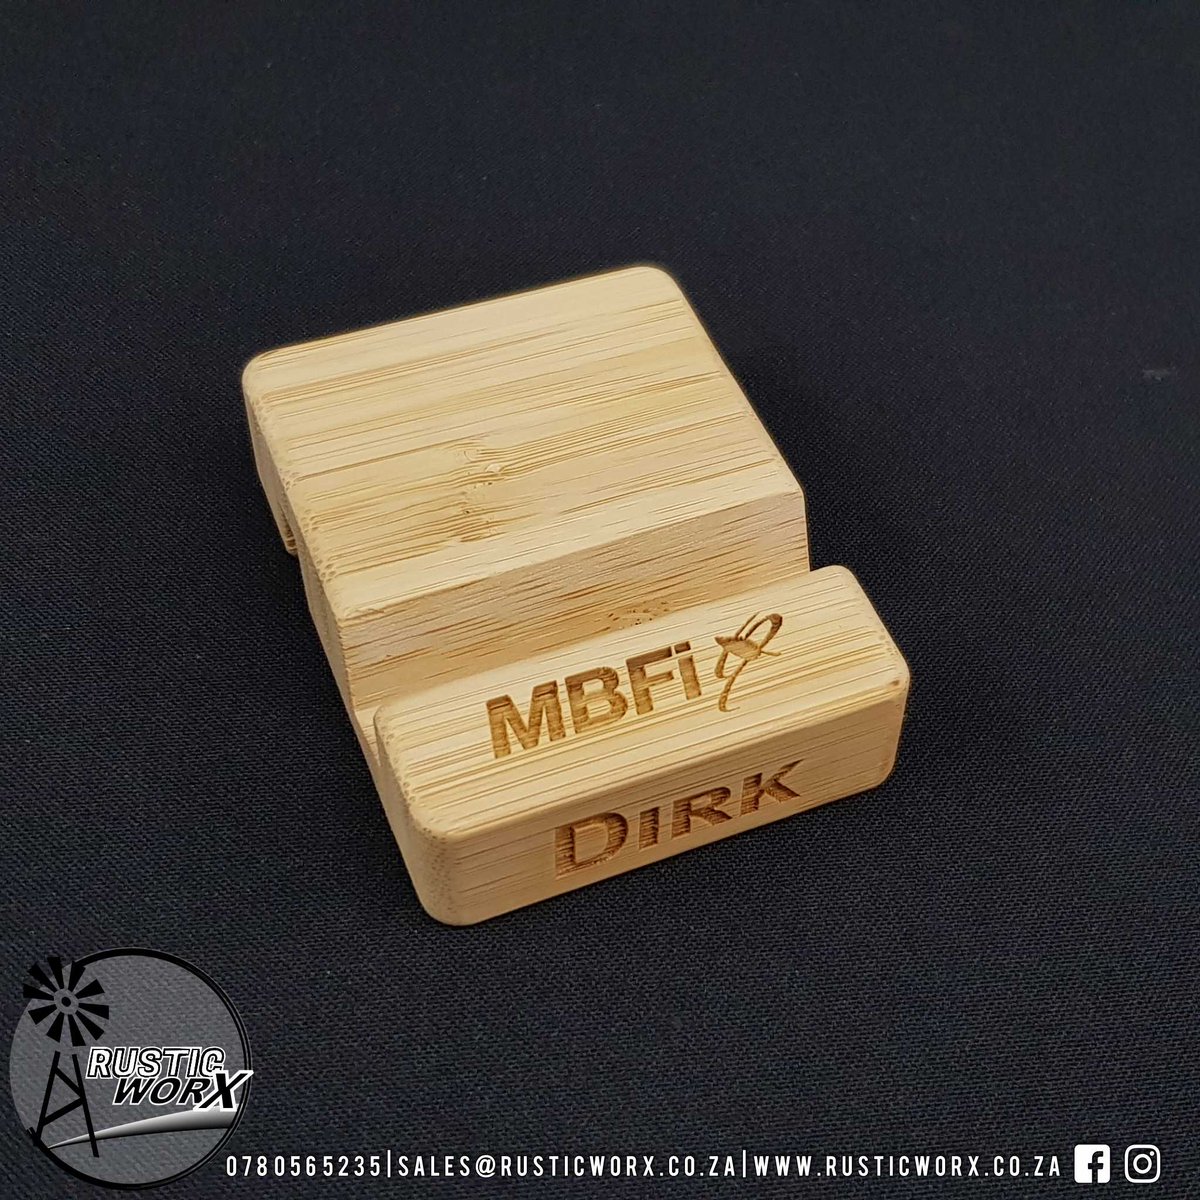 Bamboo Cellphone  & Tablet Stands 

Contact us on sales@rusticworx.co.za or visit our website rusticworx.co.za 

#bamboo #cellphonestand #gifts #corporategifts #branding #supportlocal #rusticworx